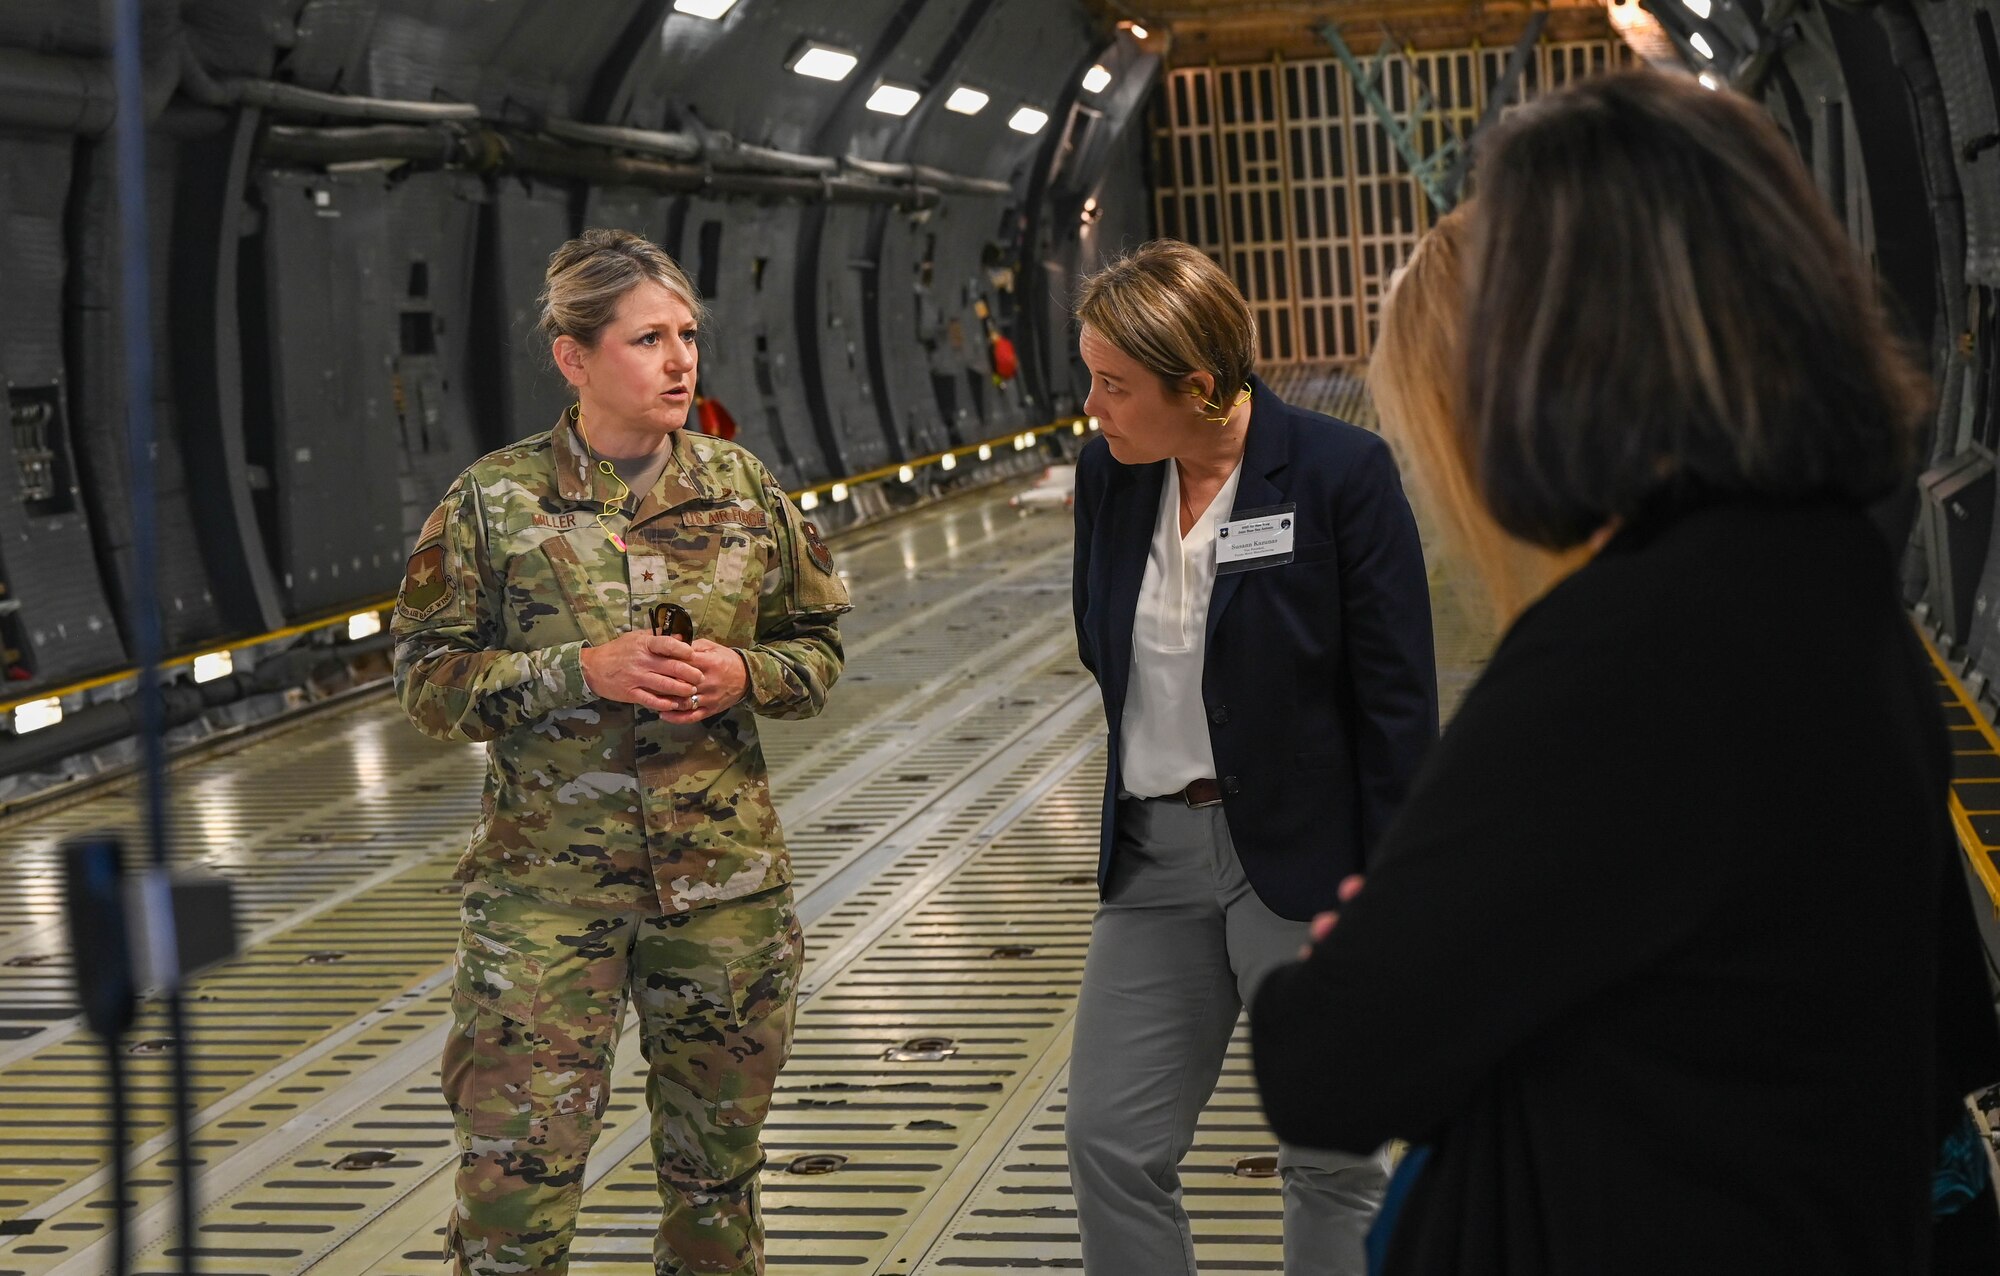 Brig. Gen. Caroline M. Miller, 502nd Air Base Wing commander, speaks to 502nd ABW honorary commanders during a tour of a 433rd Airlift Wing assigned C-5M Super Galaxy at Joint Base San Antonio-Lackland, Texas, March 25, 2022. The Honorary Commanders’ visit promoted and fostered relationships between the military service and local community leaders. (U.S. Air Force photo by Airman Mark Colmenares)